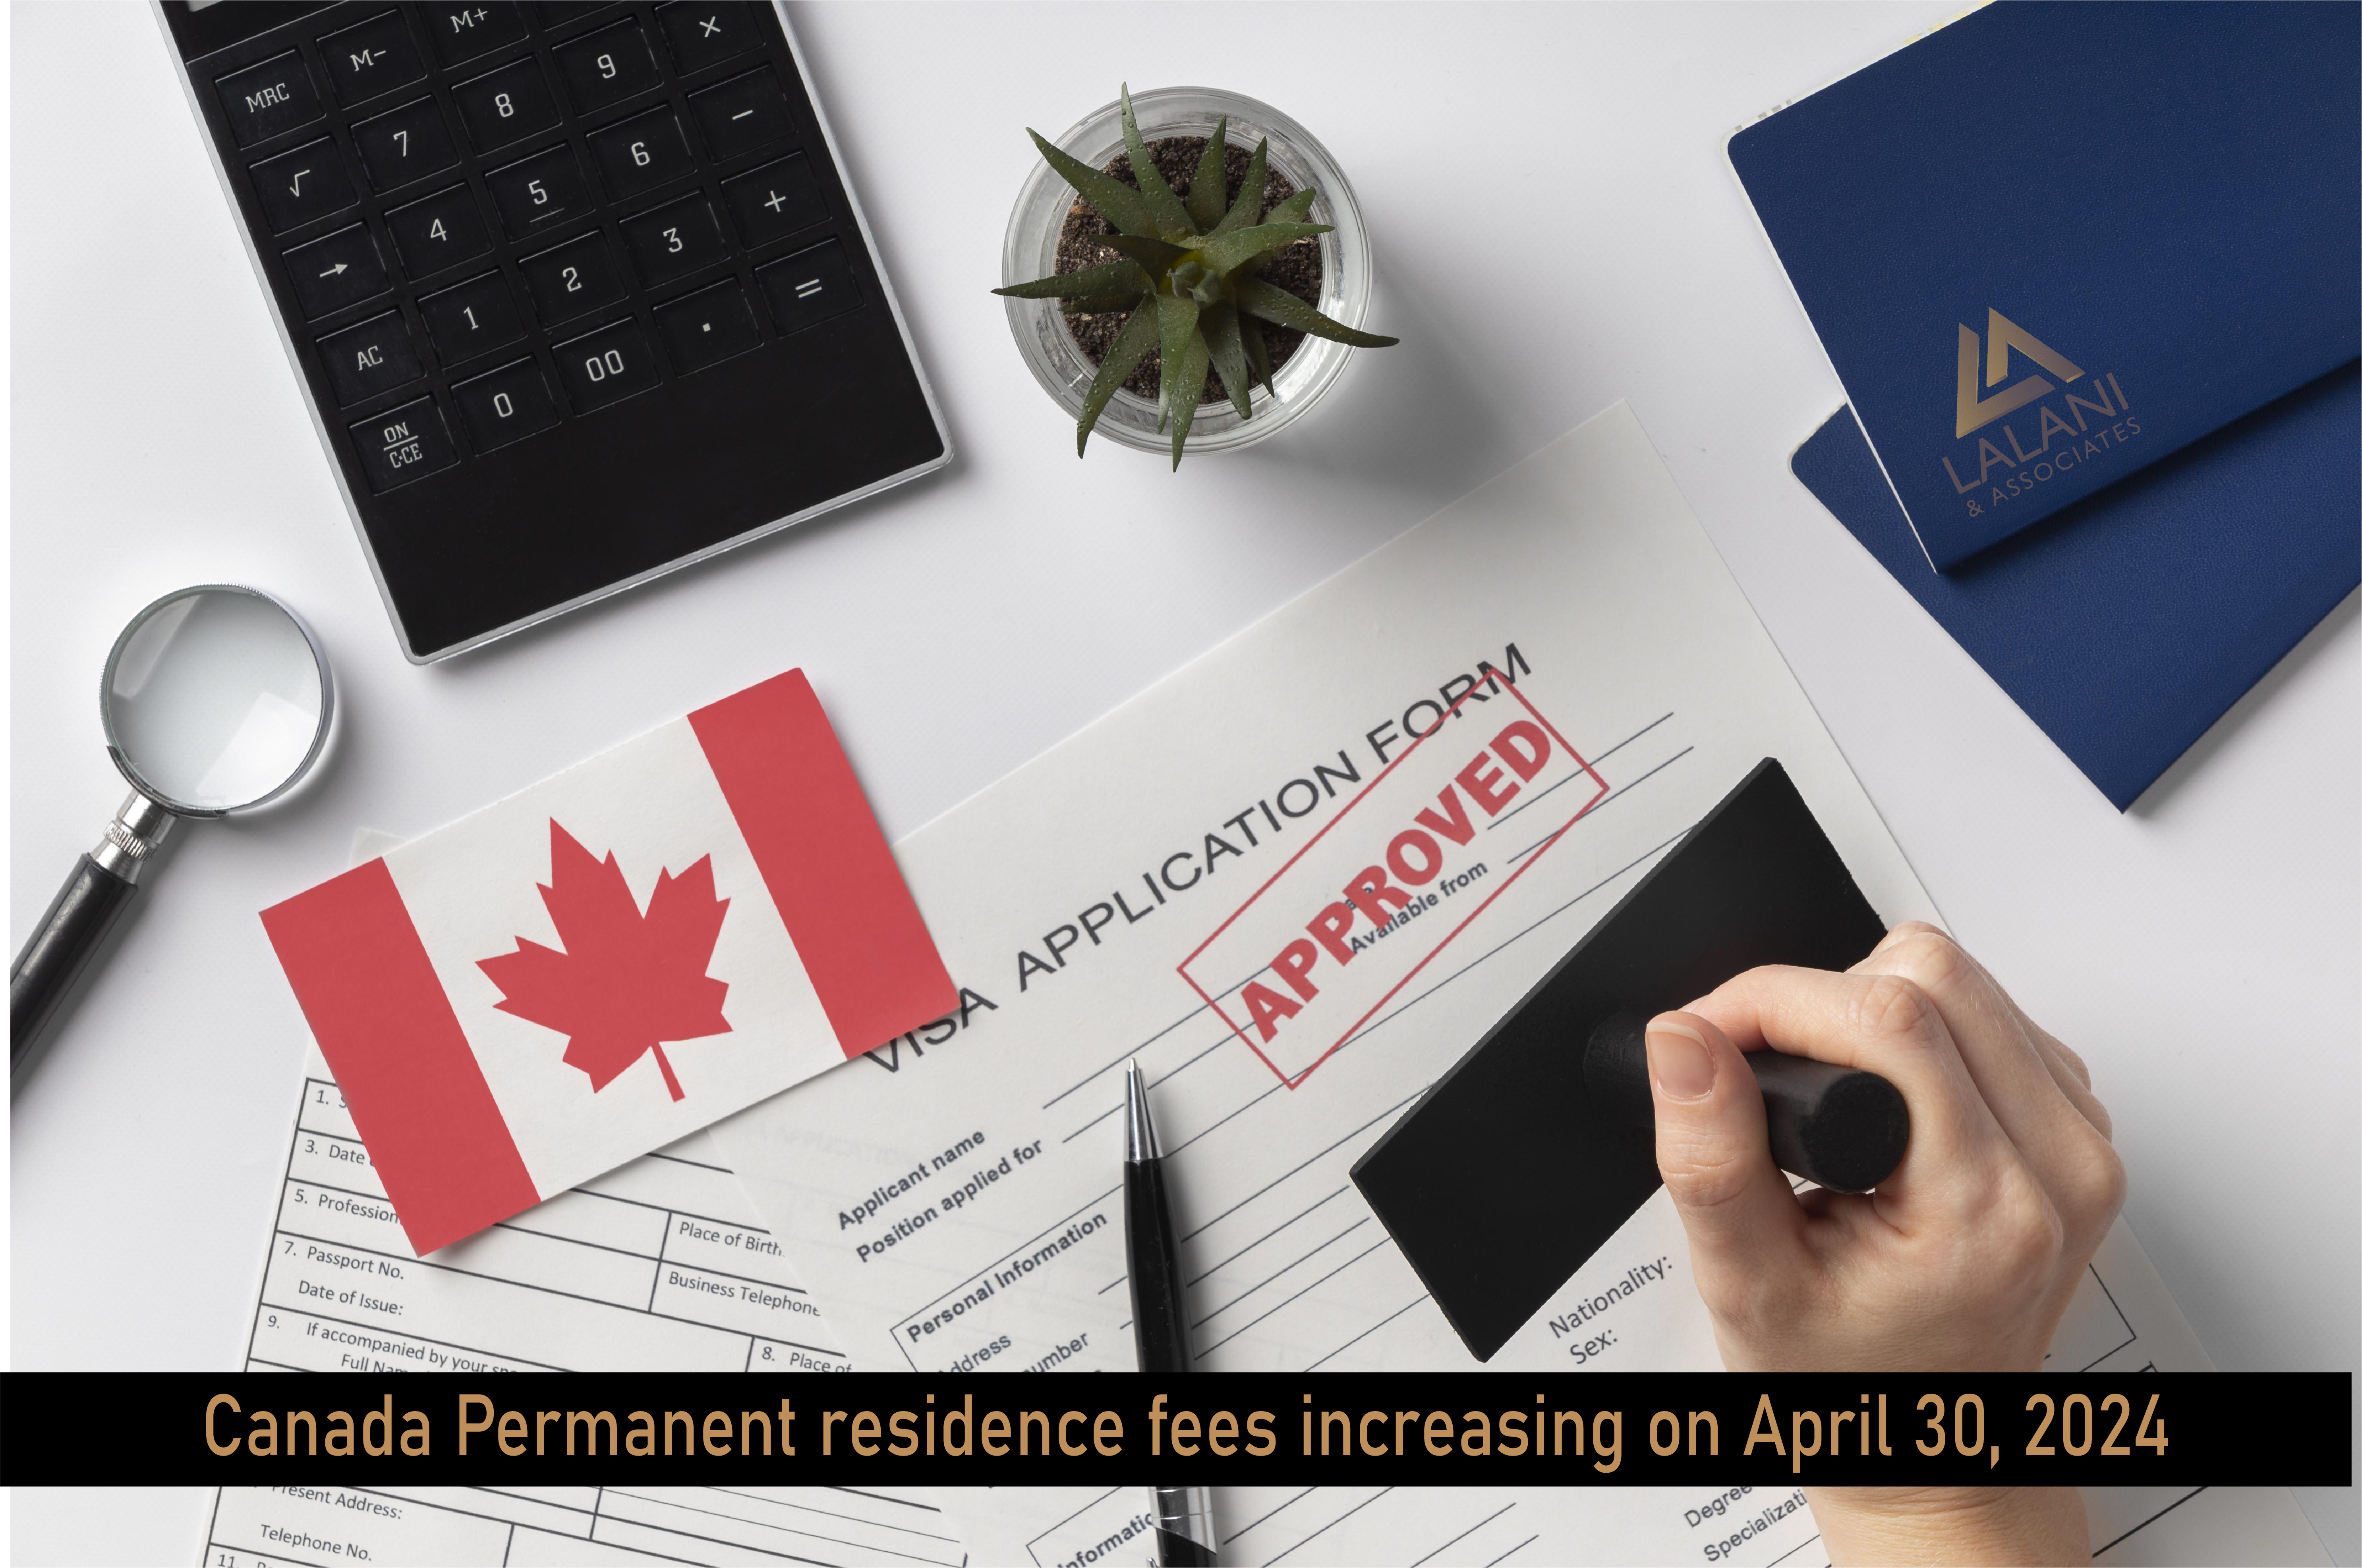 Canada Fees Update: Canada Permanent Residence fees increasing on April 30, 2024